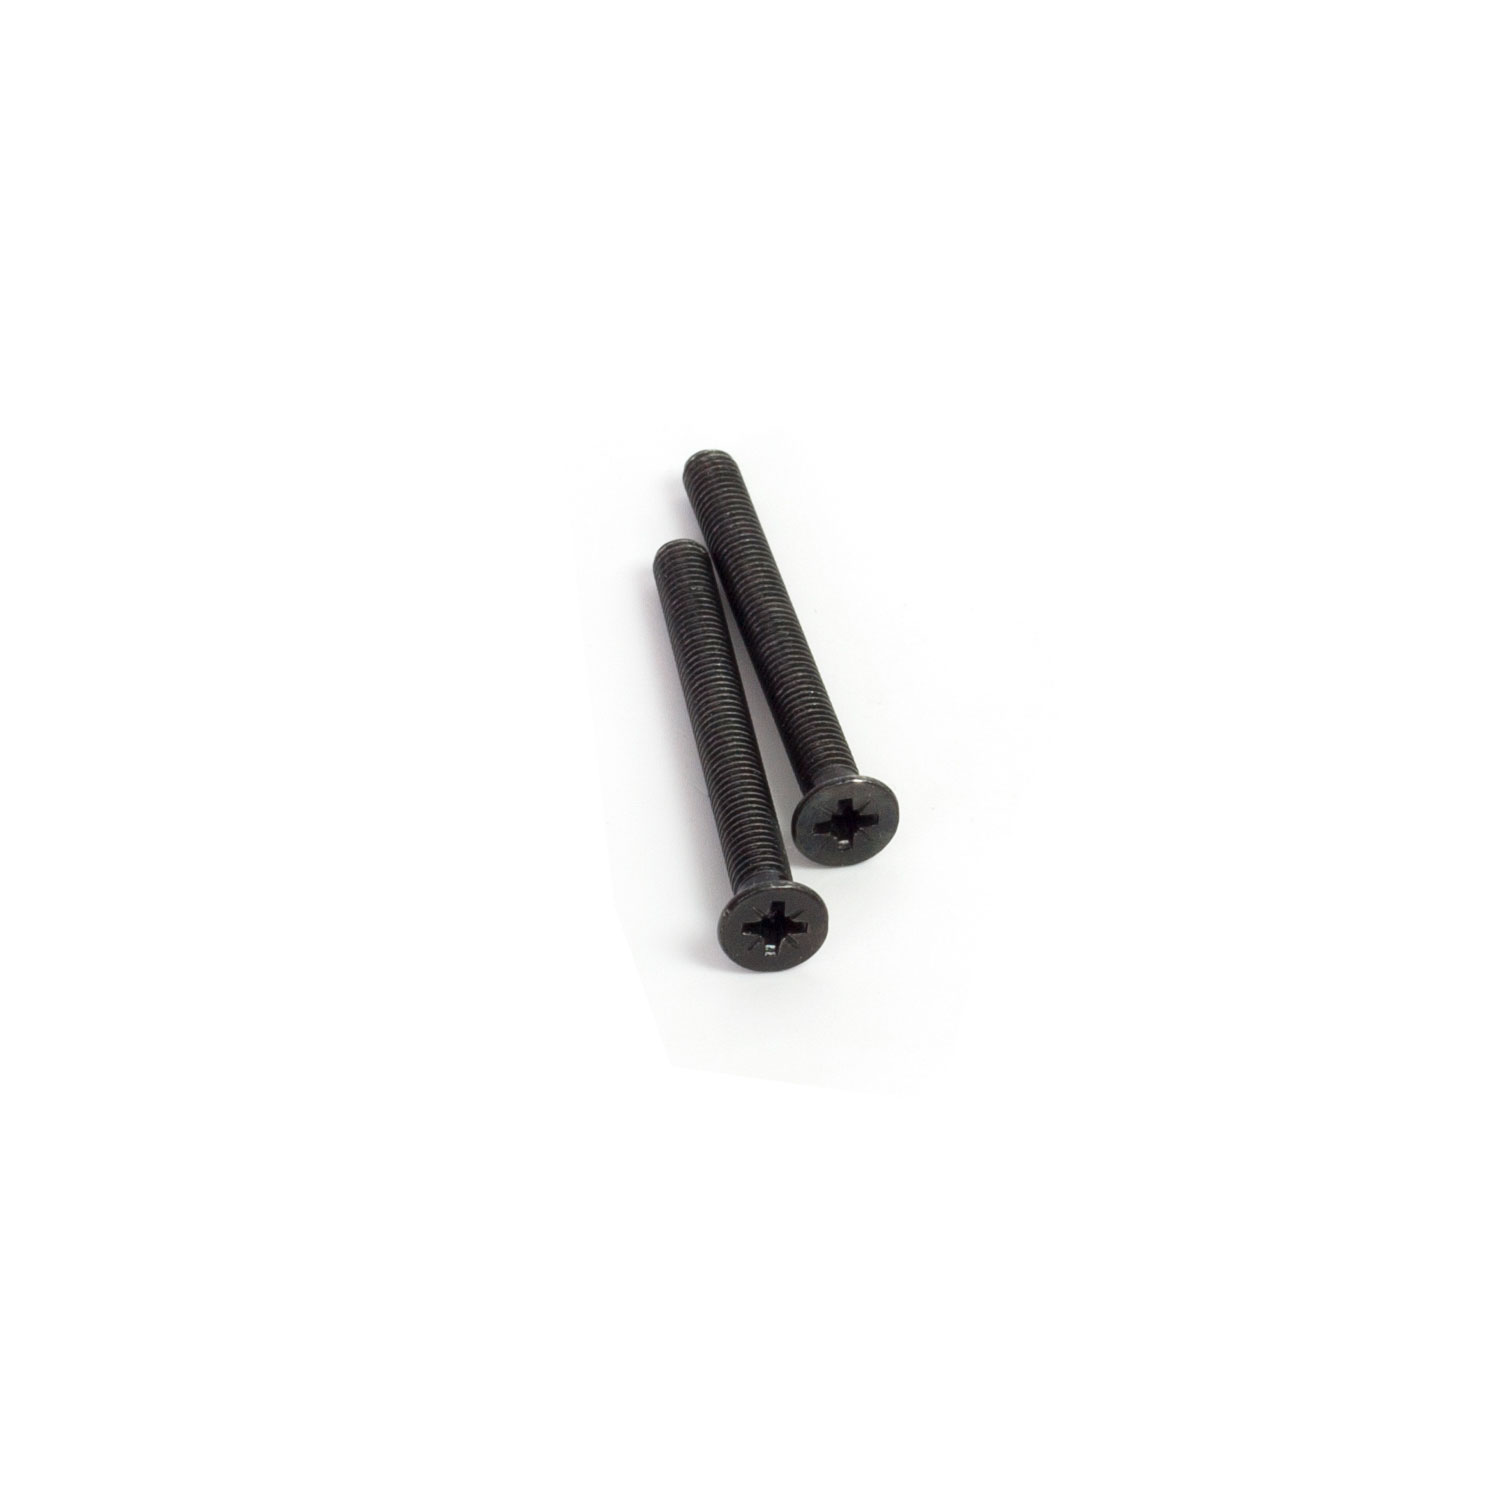 Screws for the Monkey Tail Window Handle